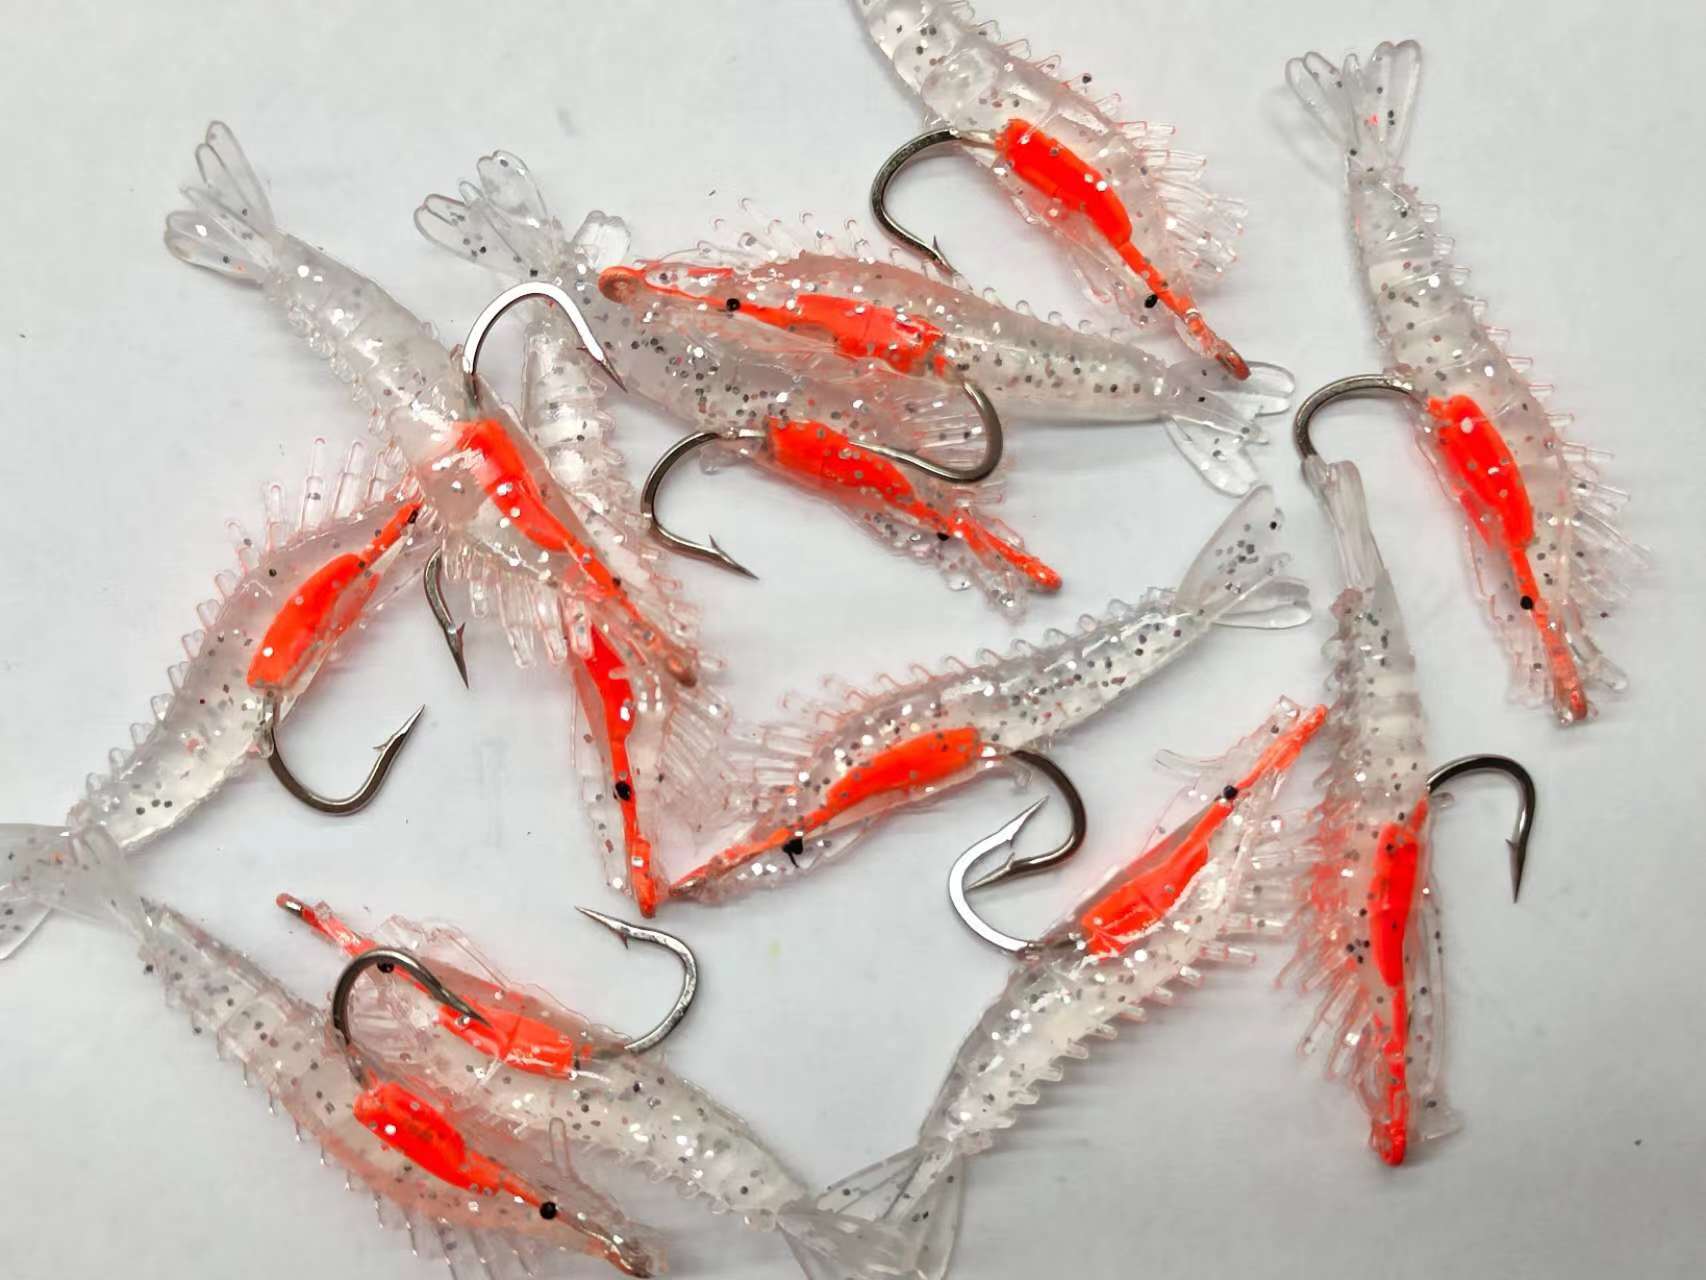 100xQuality Long Shank 8# RED Hooks Fishing Tackle